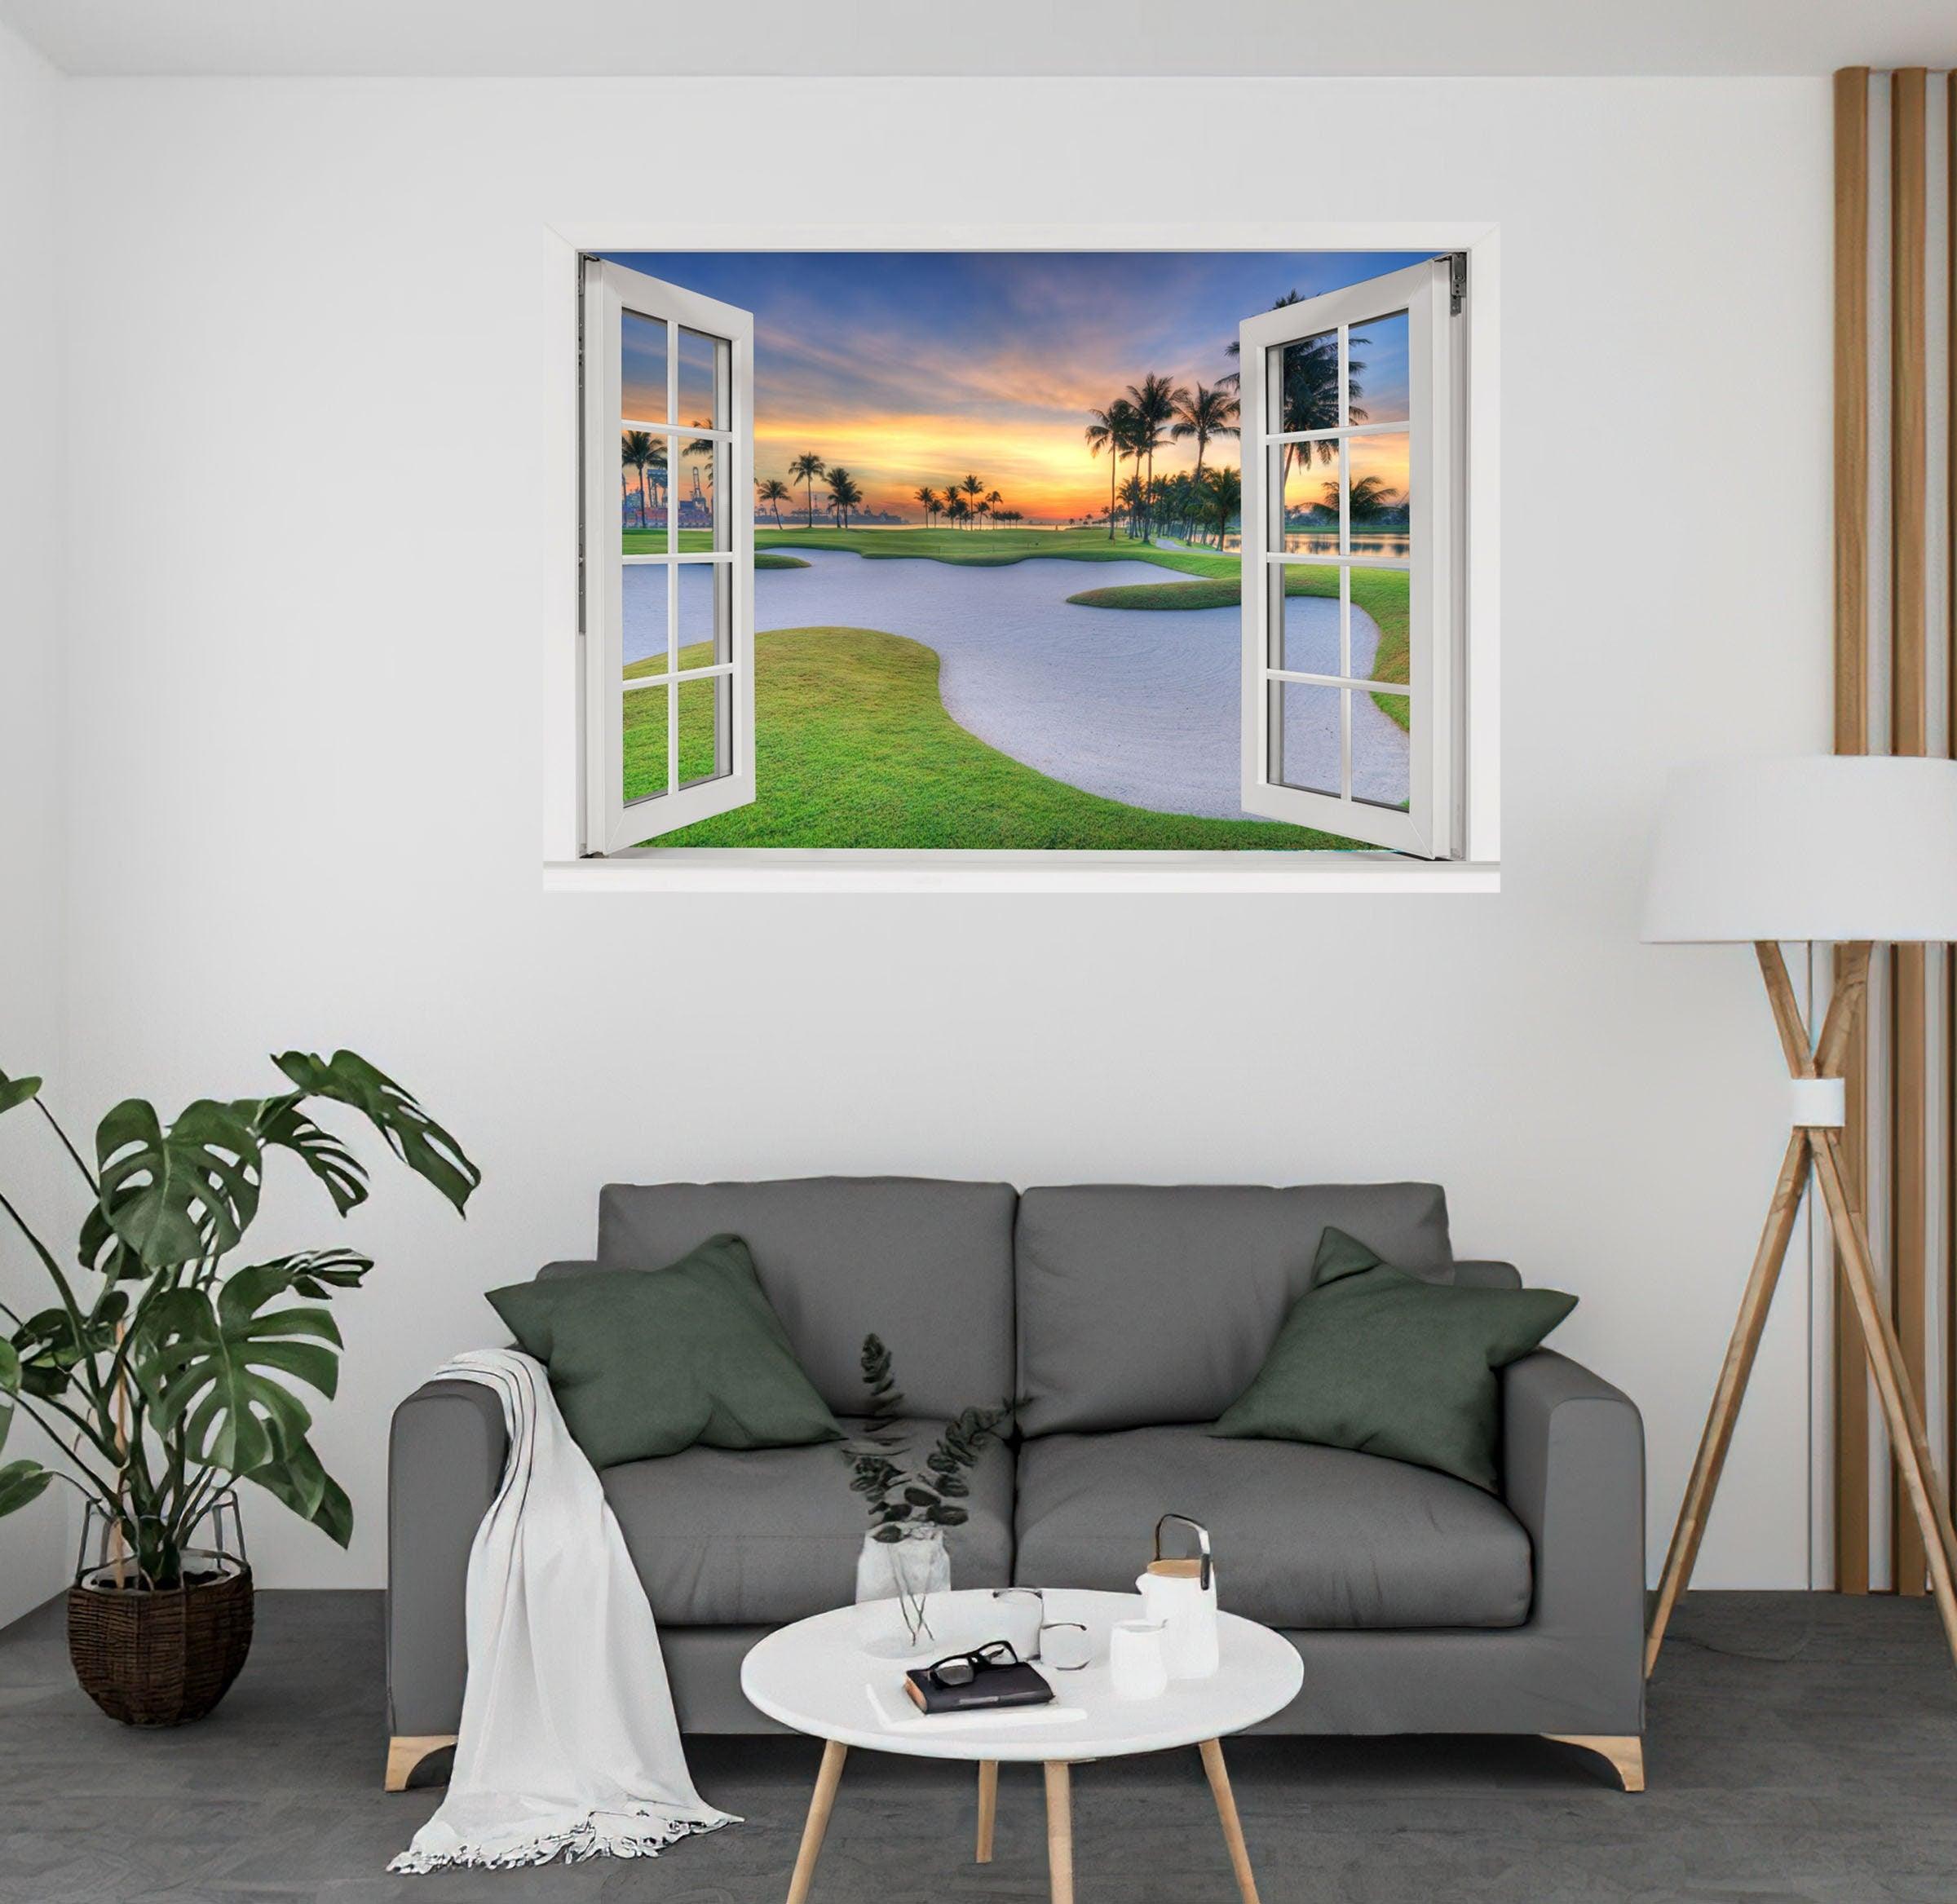 Window Scape Golf #8 Window Decal Sticker Mural Sand Trap Removable Fabric Window Frame Office Bedroom 3D